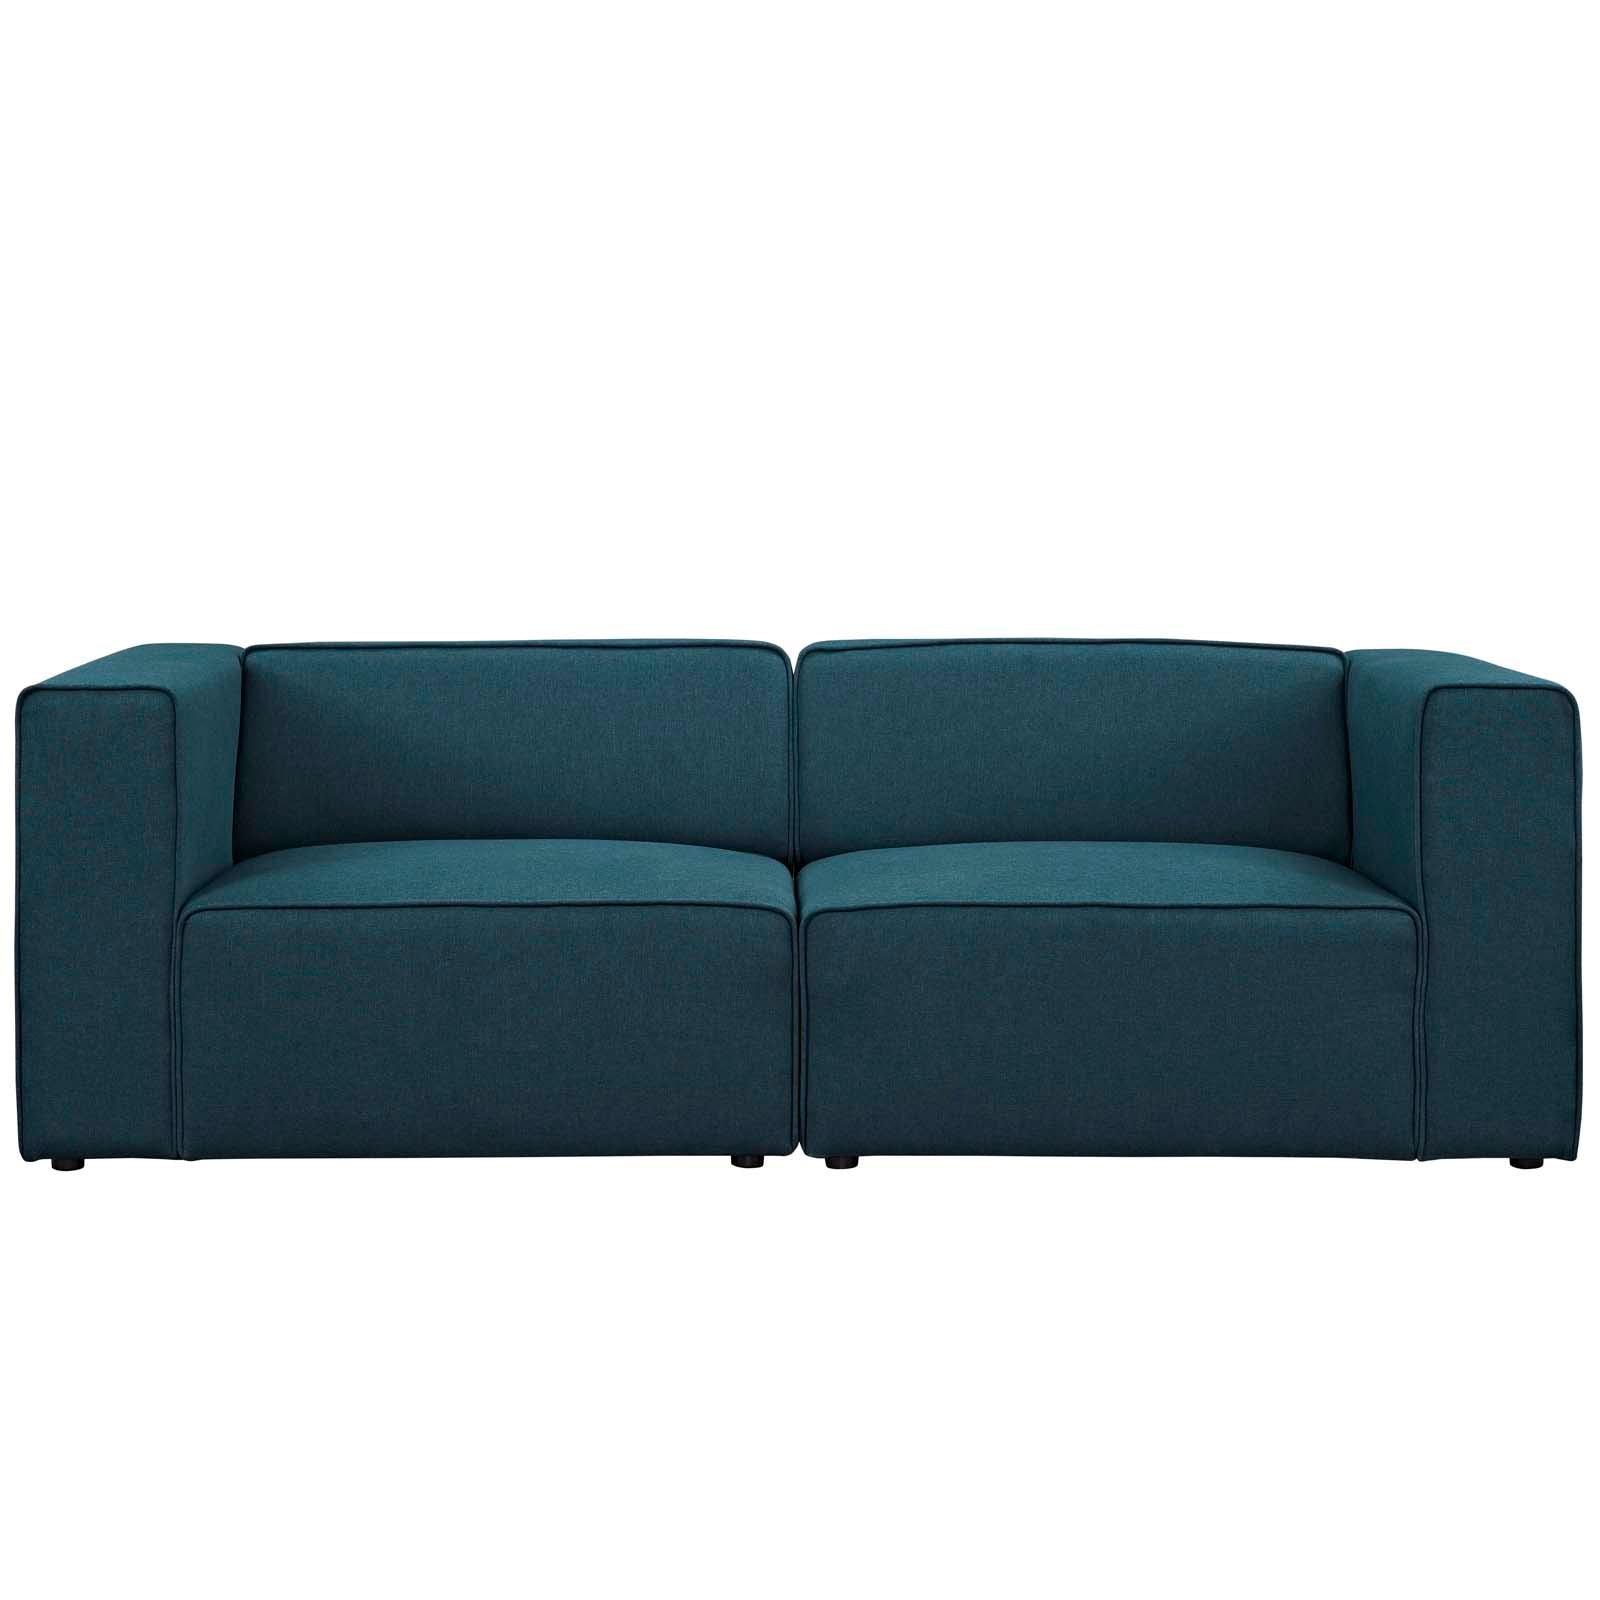 Modway Sectional Sofas - Mingle 2 Piece Upholstered Fabric Sectional Sofa Set